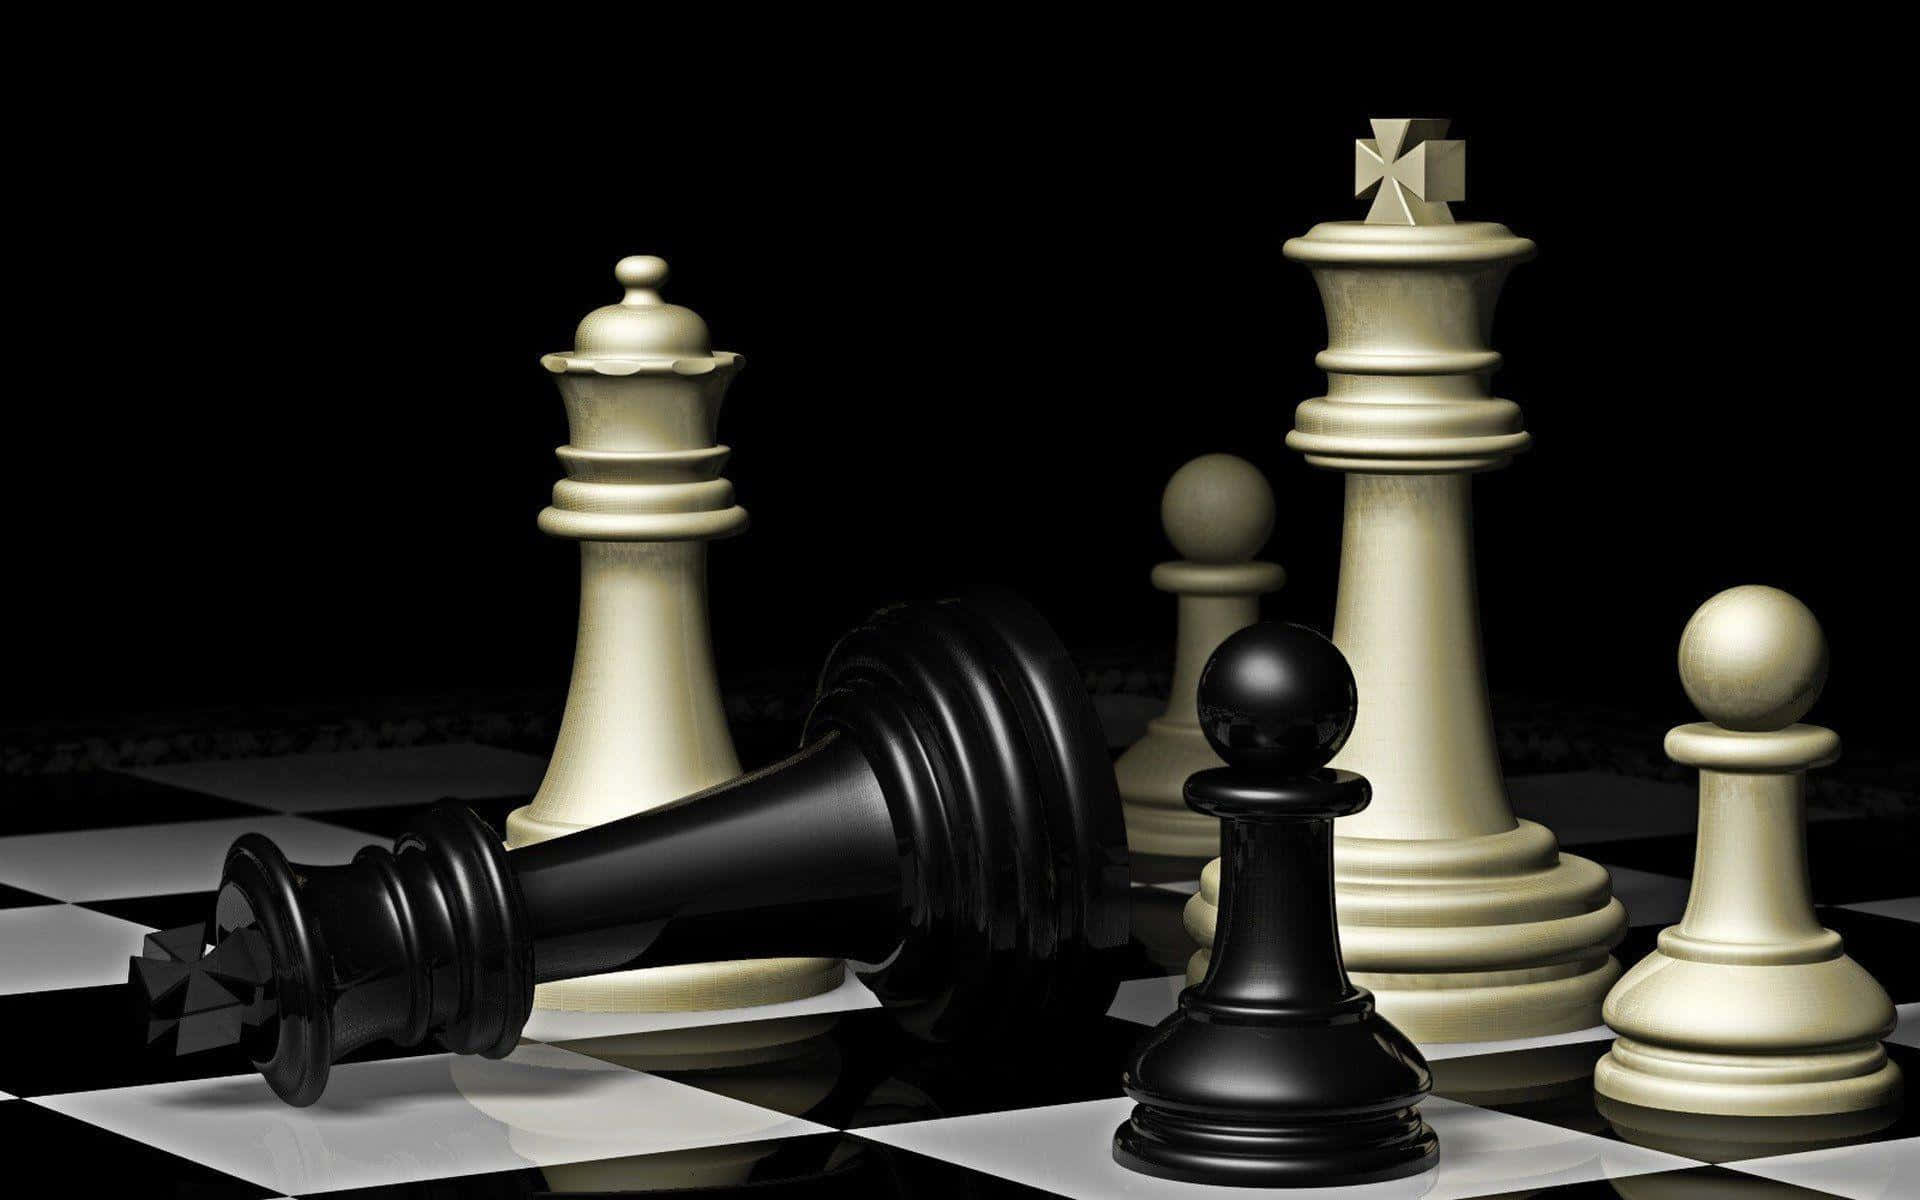 Chess Wallpaper for iPhone 11, Pro Max, X, 8, 7, 6 - Free Download